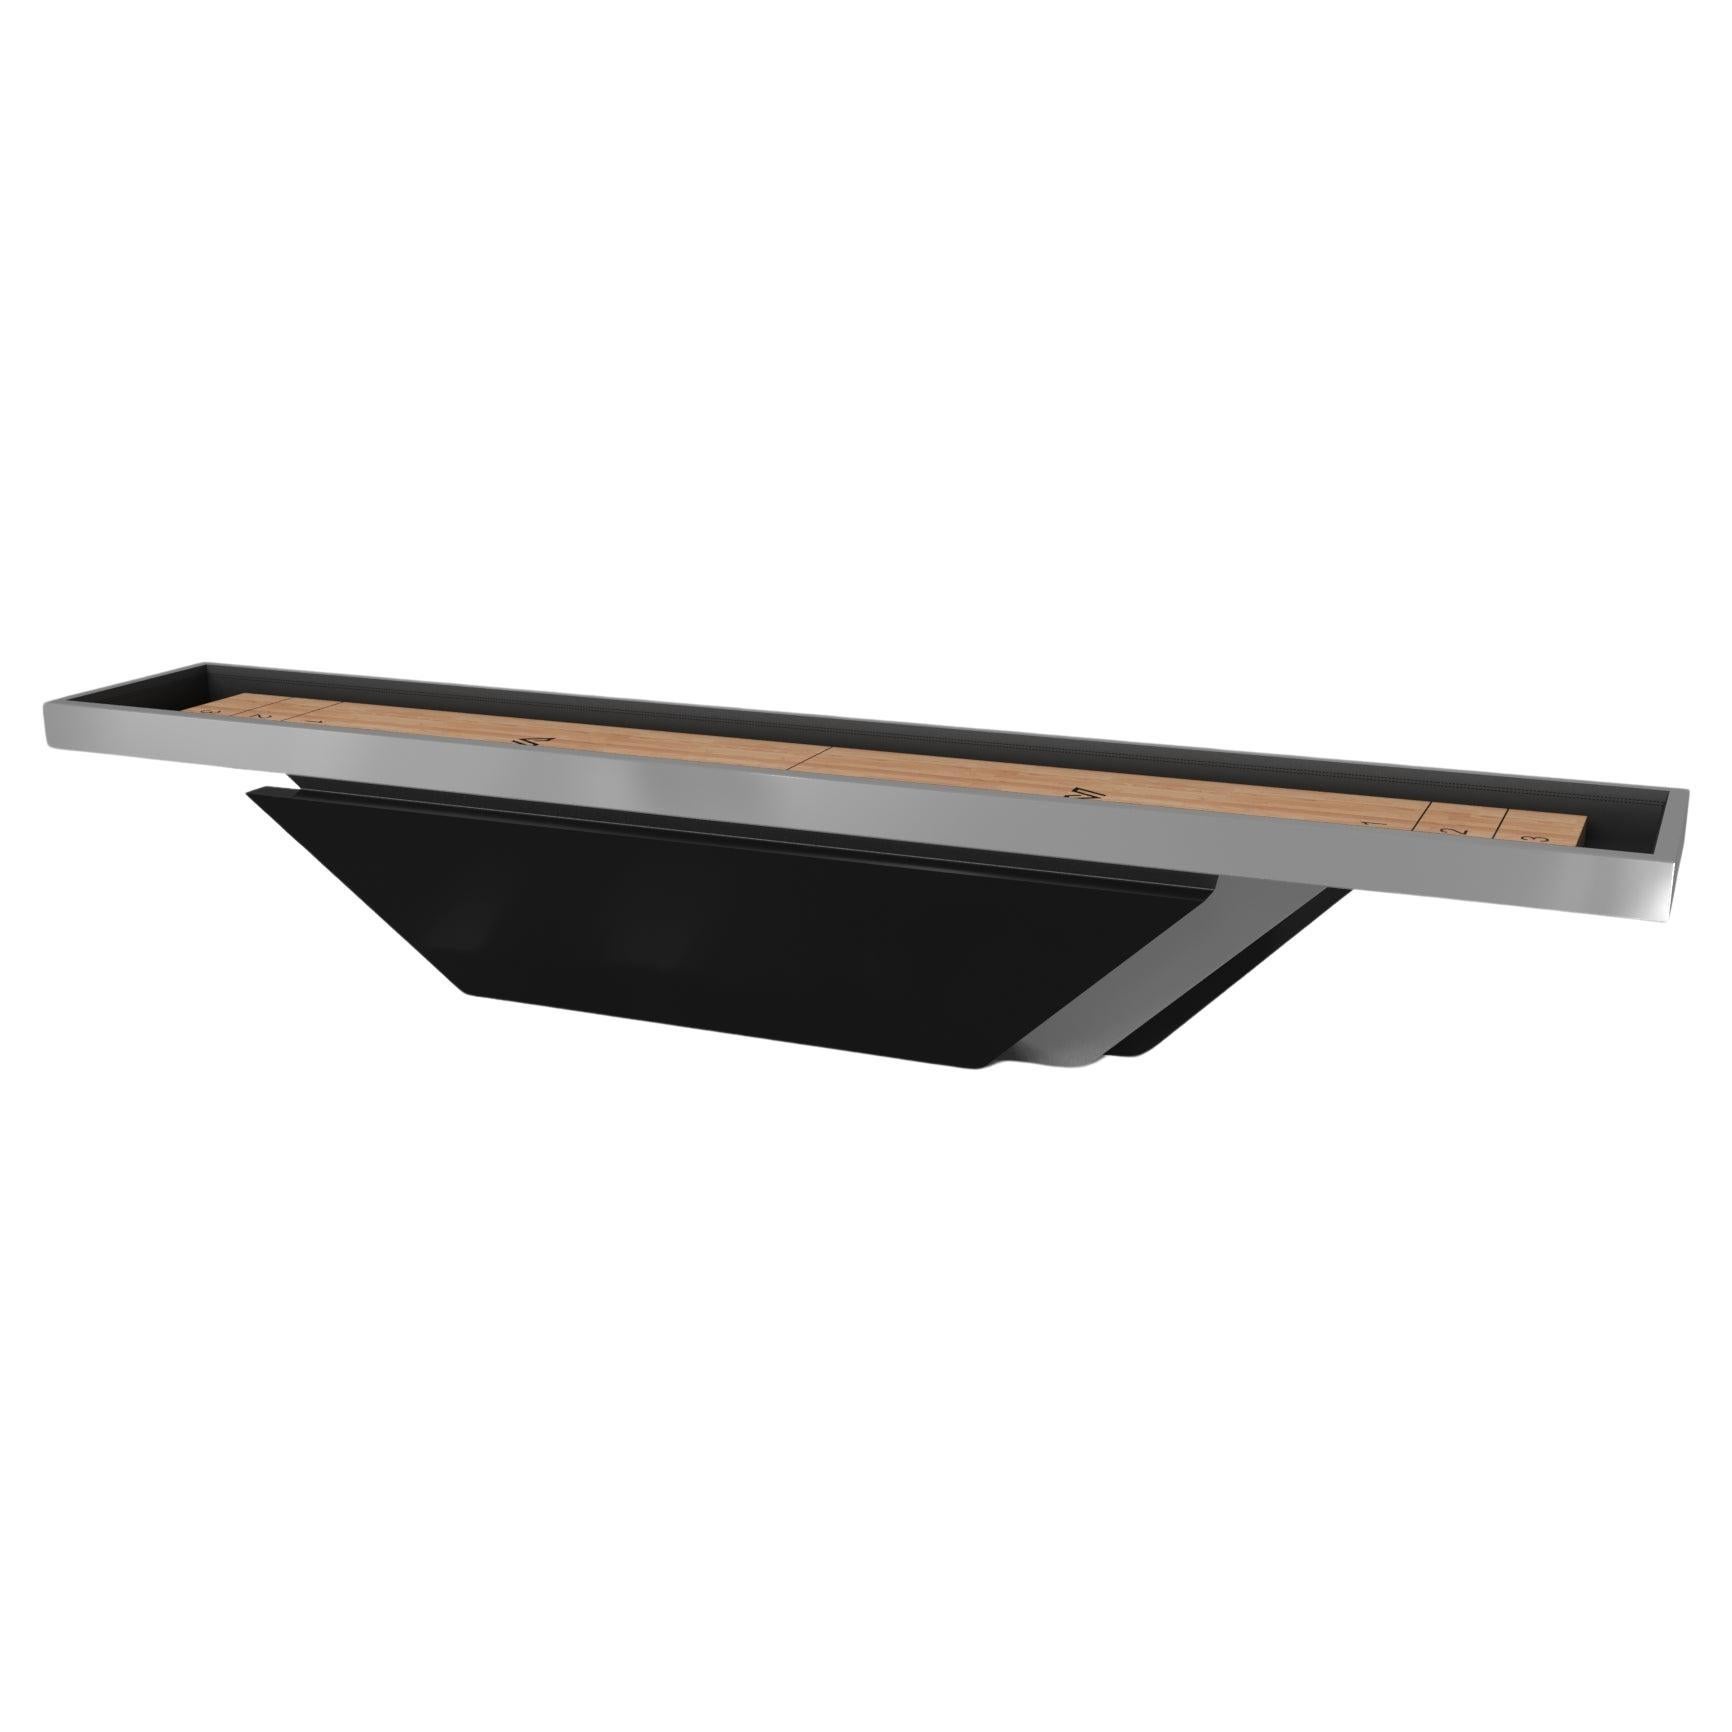 Elevate Customs Vogue Shuffleboard Tables/Stainless Steel Sheet Metal in 16'-USA